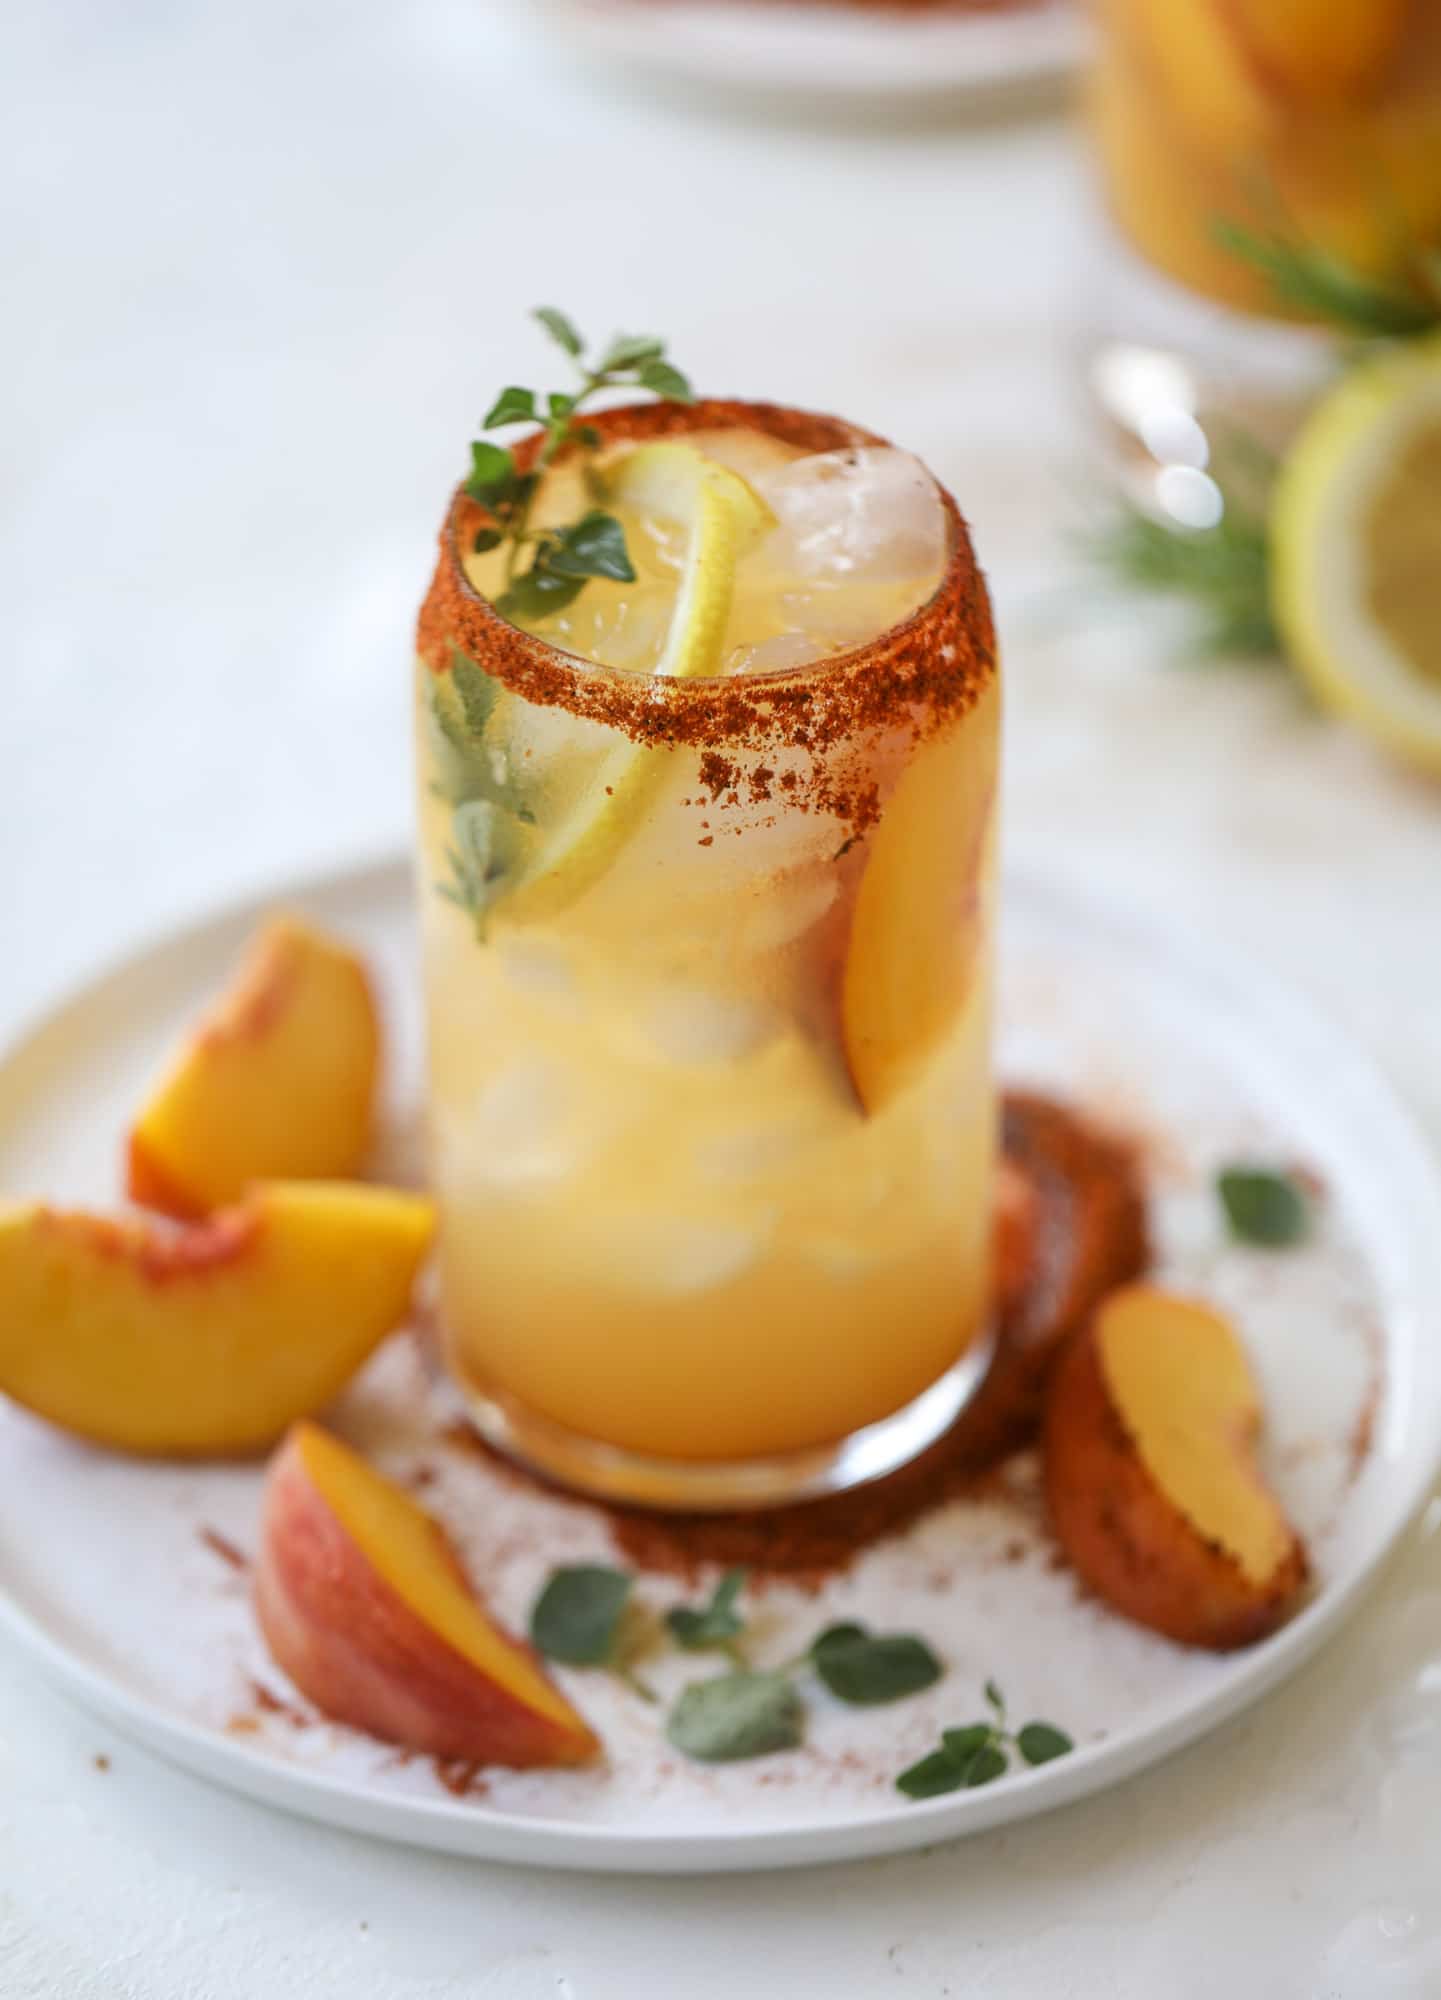 This peach lemonade is super refreshing and a bit spicy for a hot and sunny summer day. It's sweet and fresh and the rim is dipped in a cajun seasoning, bringing the best bite of heat to this perfect summer drink. So fresh! I howsweeteats.com #peach #lemonade #cajun #summer #mocktail #lemon #drink